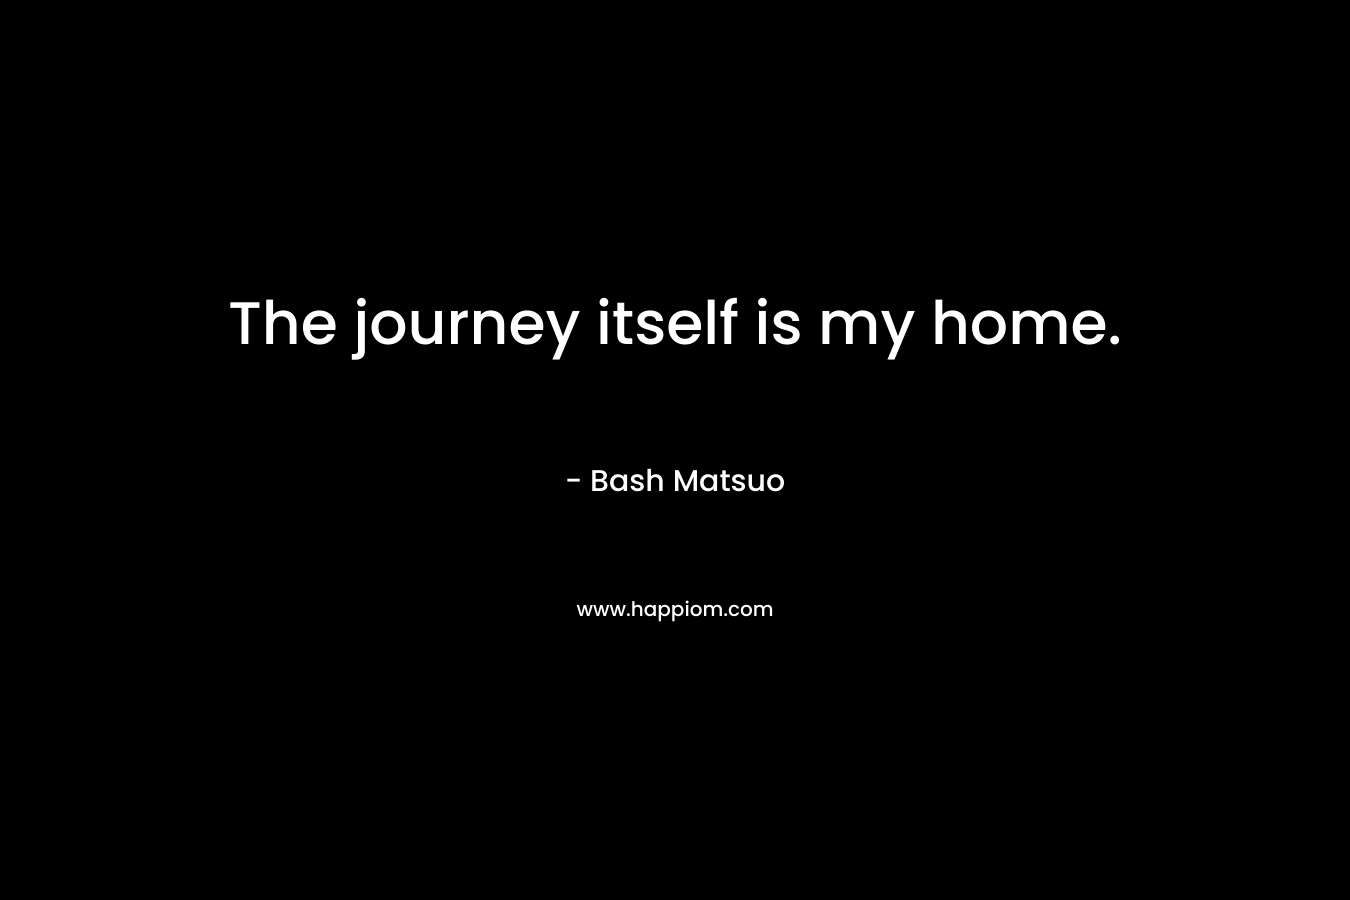 The journey itself is my home. – Bash Matsuo